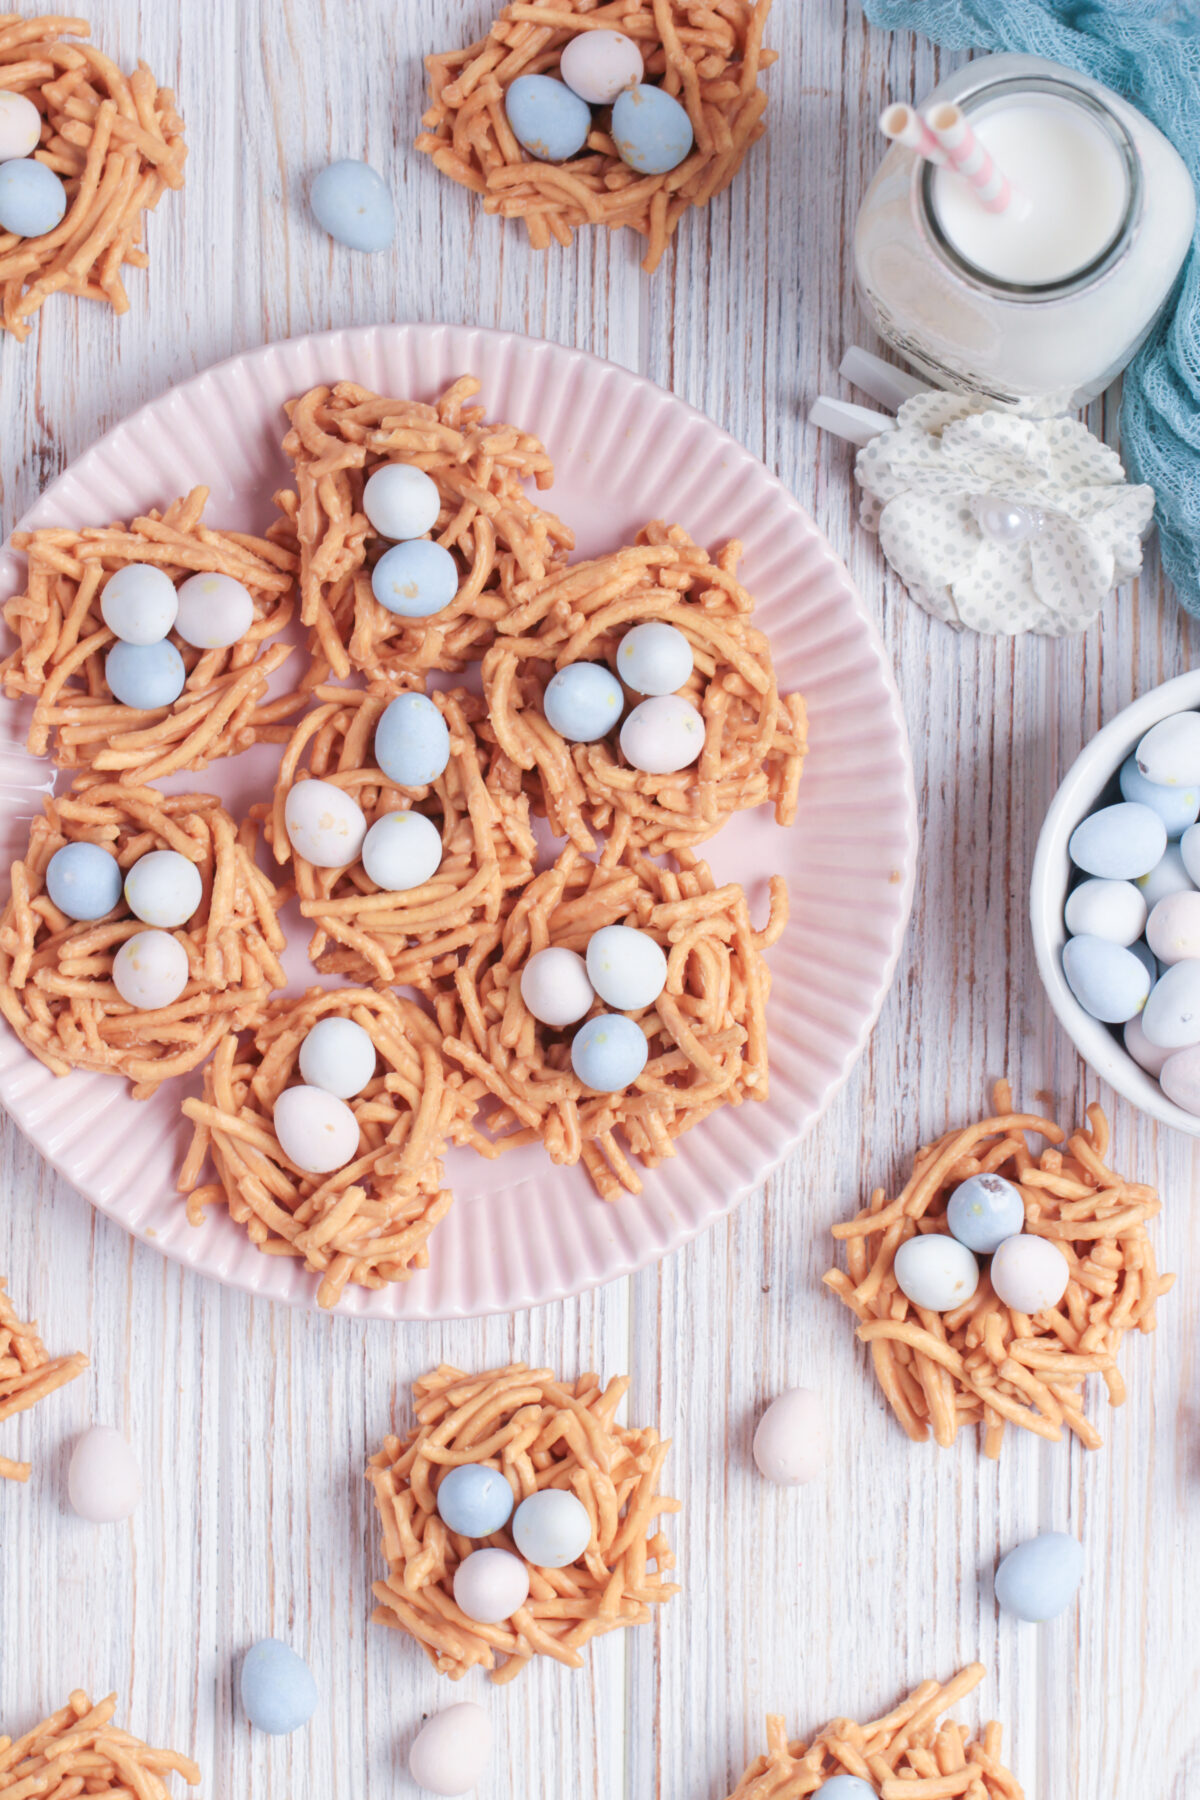 Need an easy yet delicious dessert to make for your Easter celebration? Try this no-bake Chow Mein Bird's Nest cookies recipe!